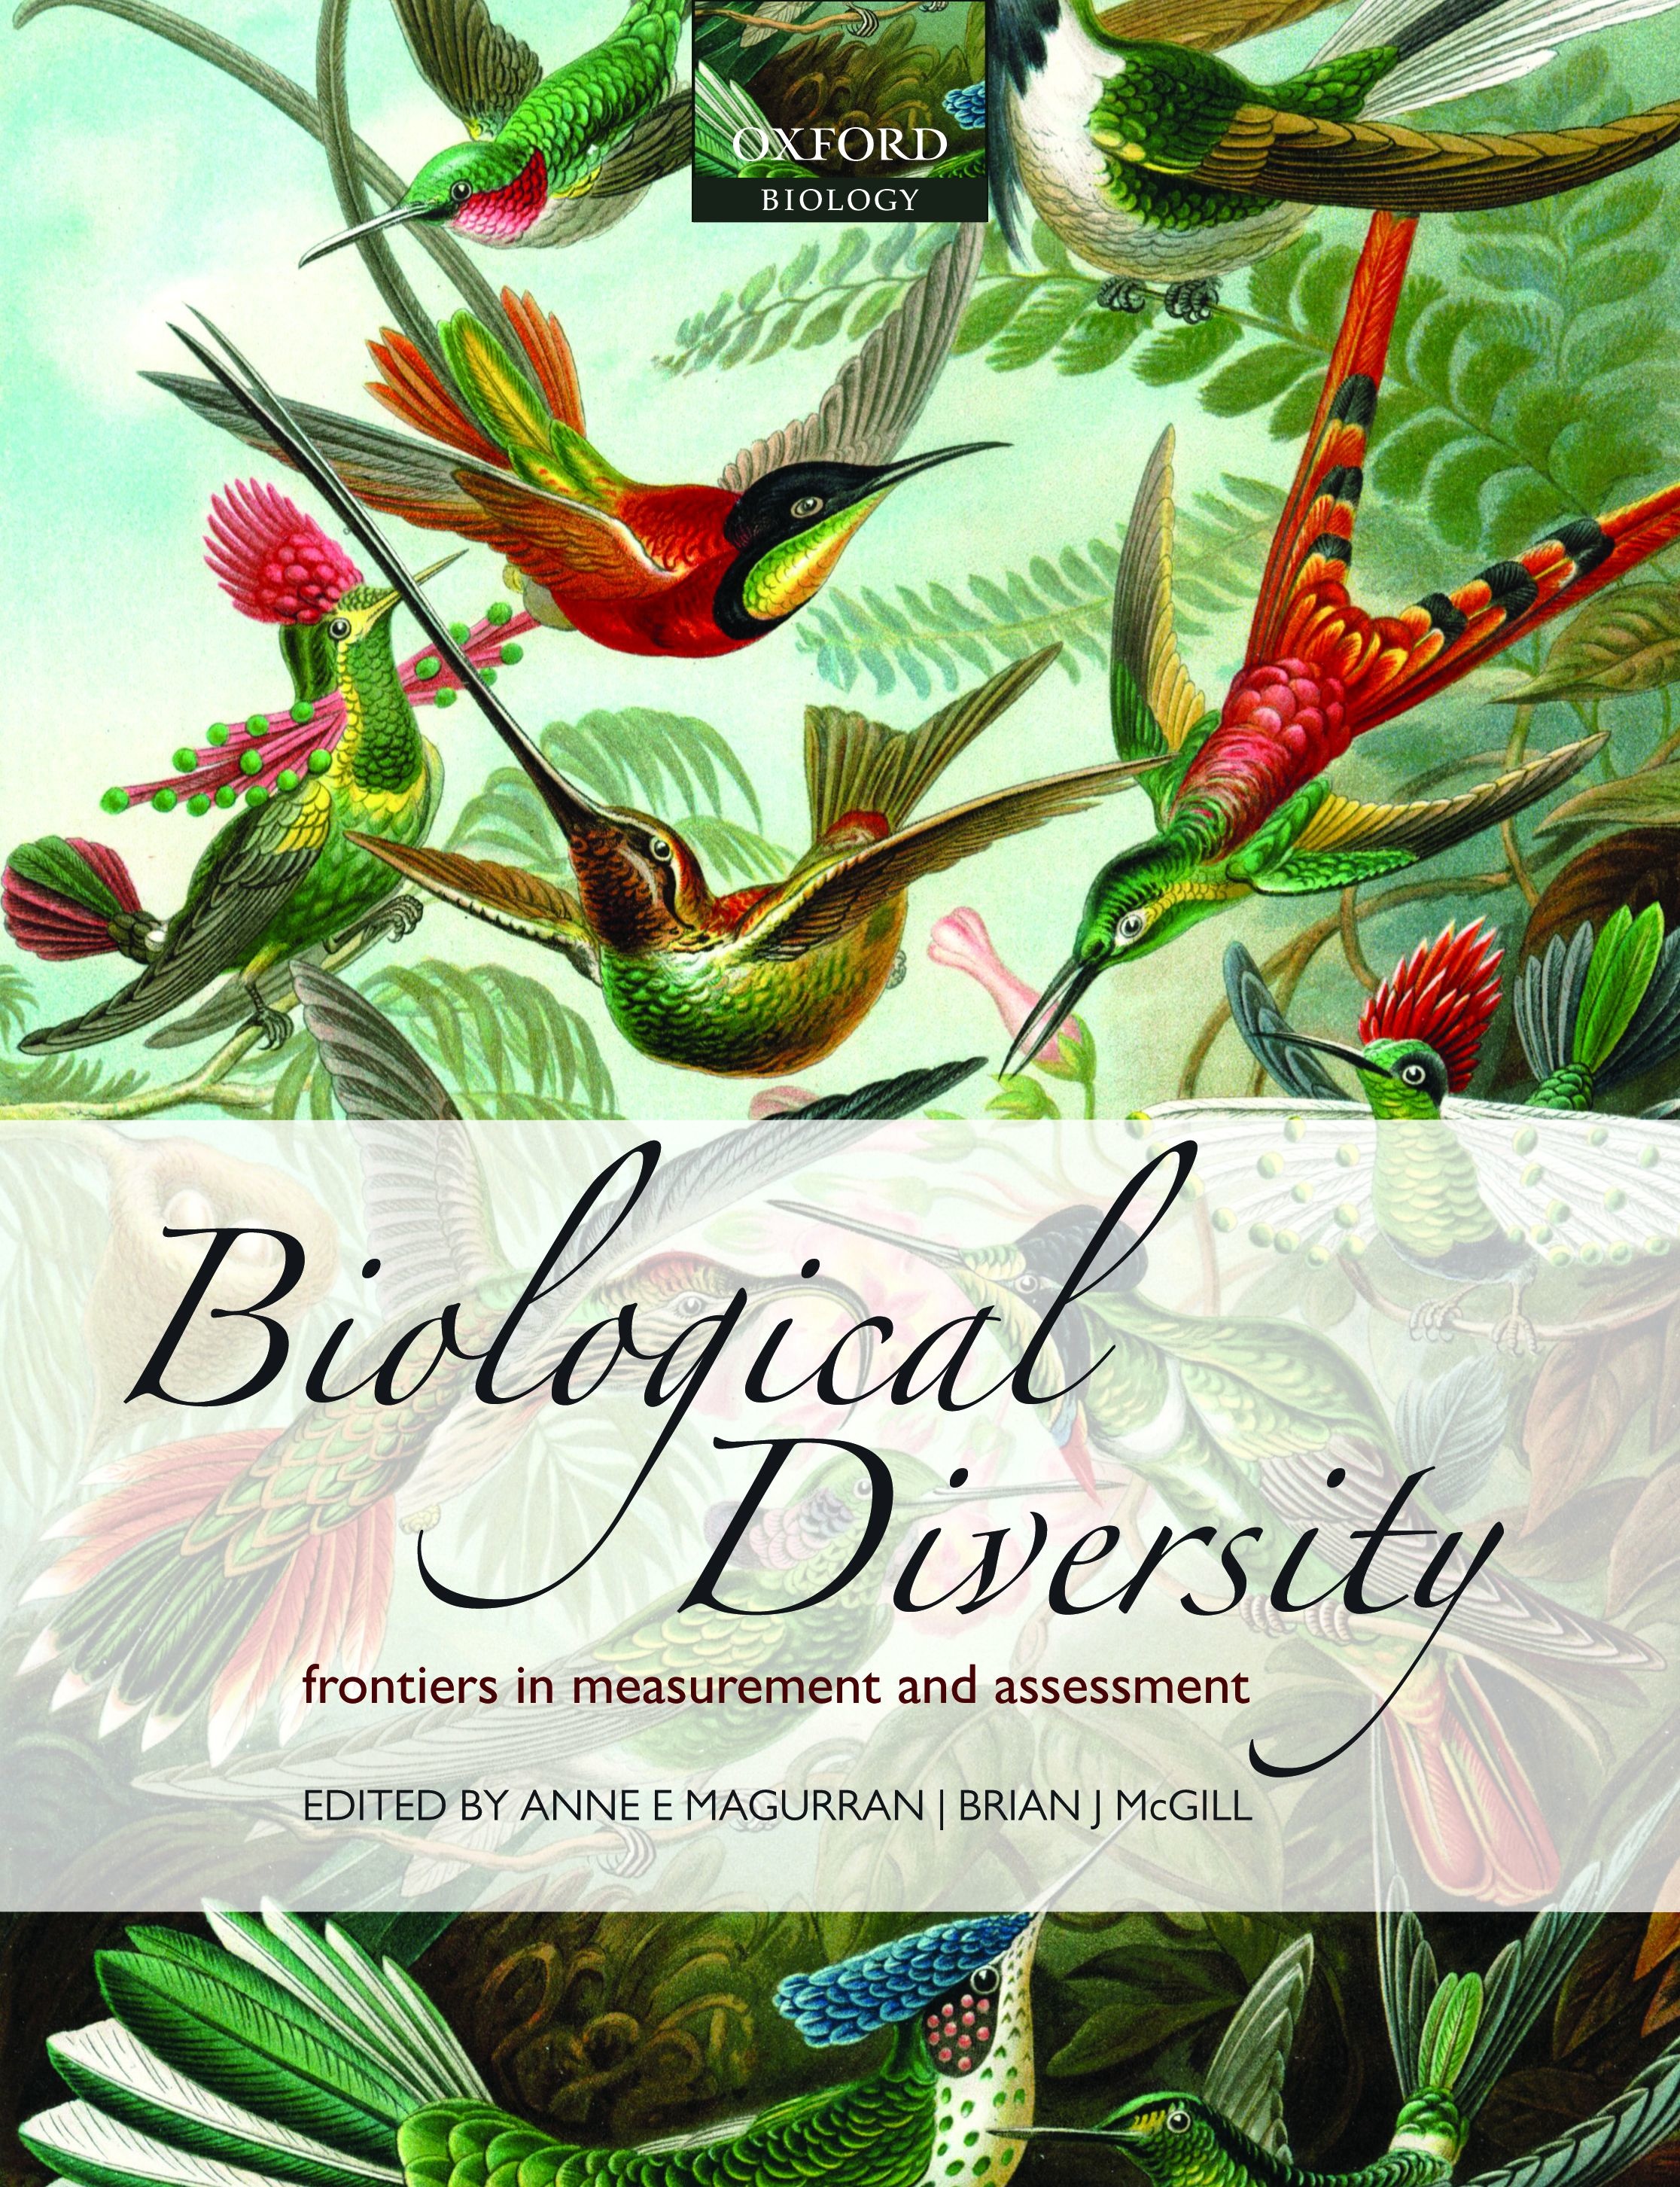 Book chapter on phylogenetic diversity